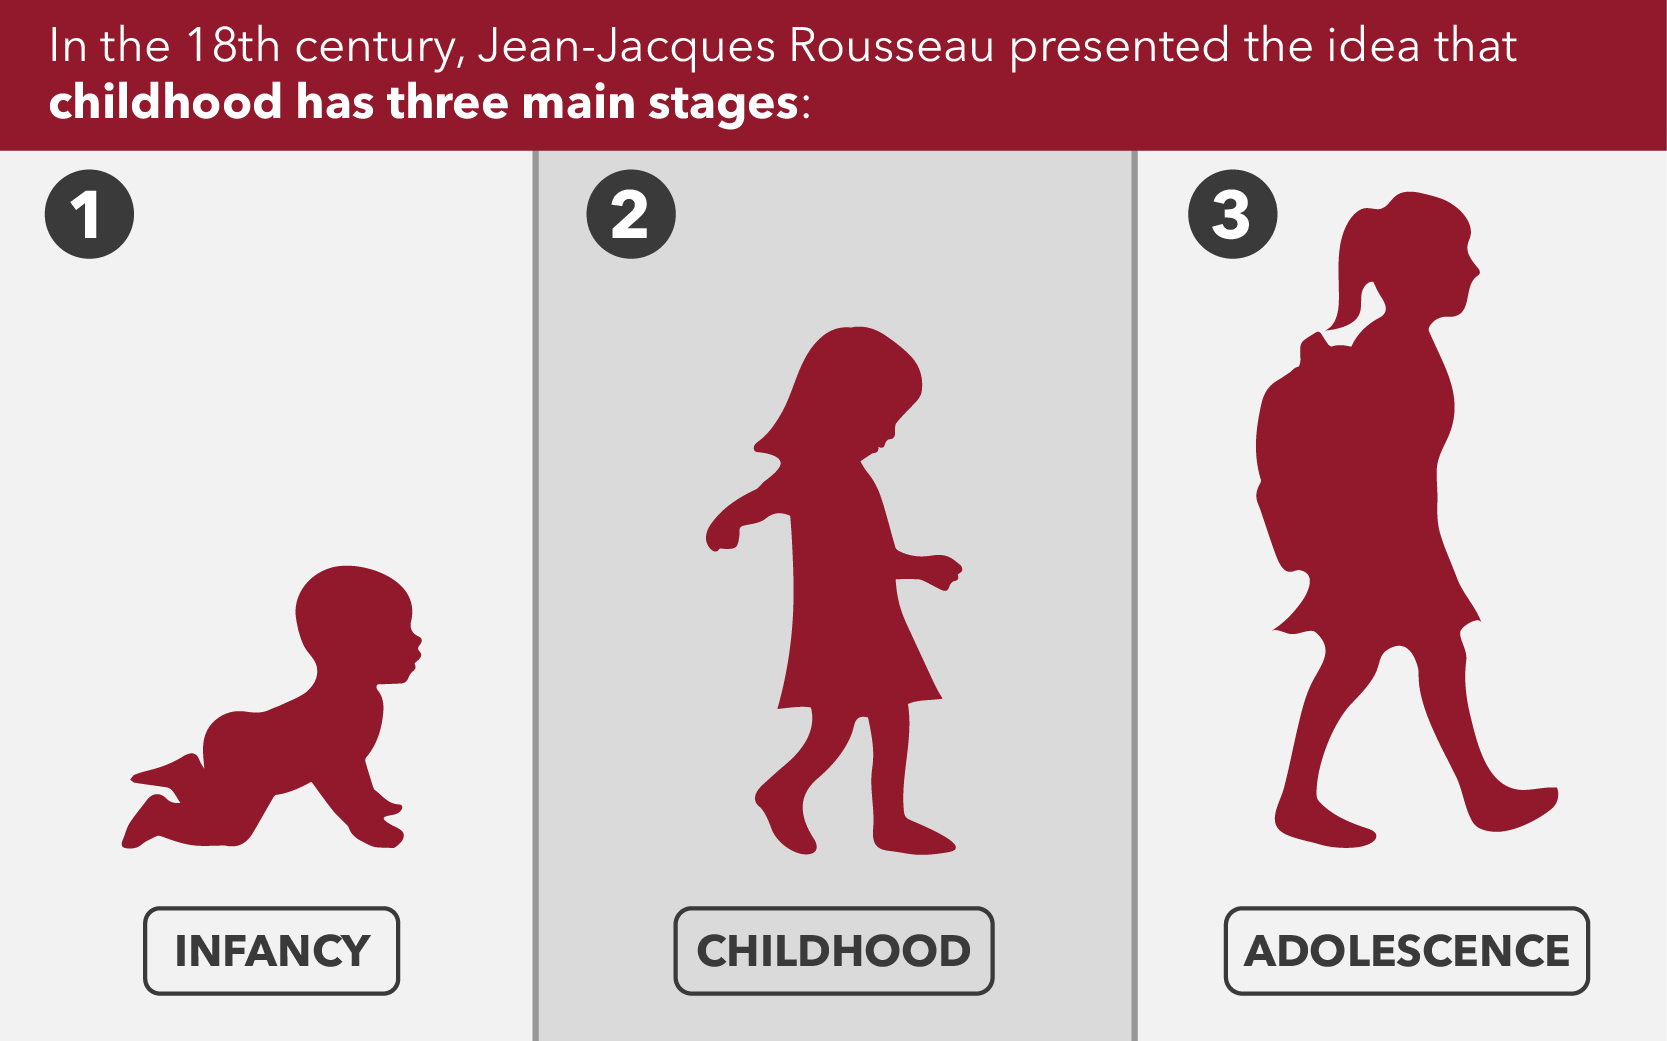 Jean-Jacques Rousseau Theory of Childhood Development